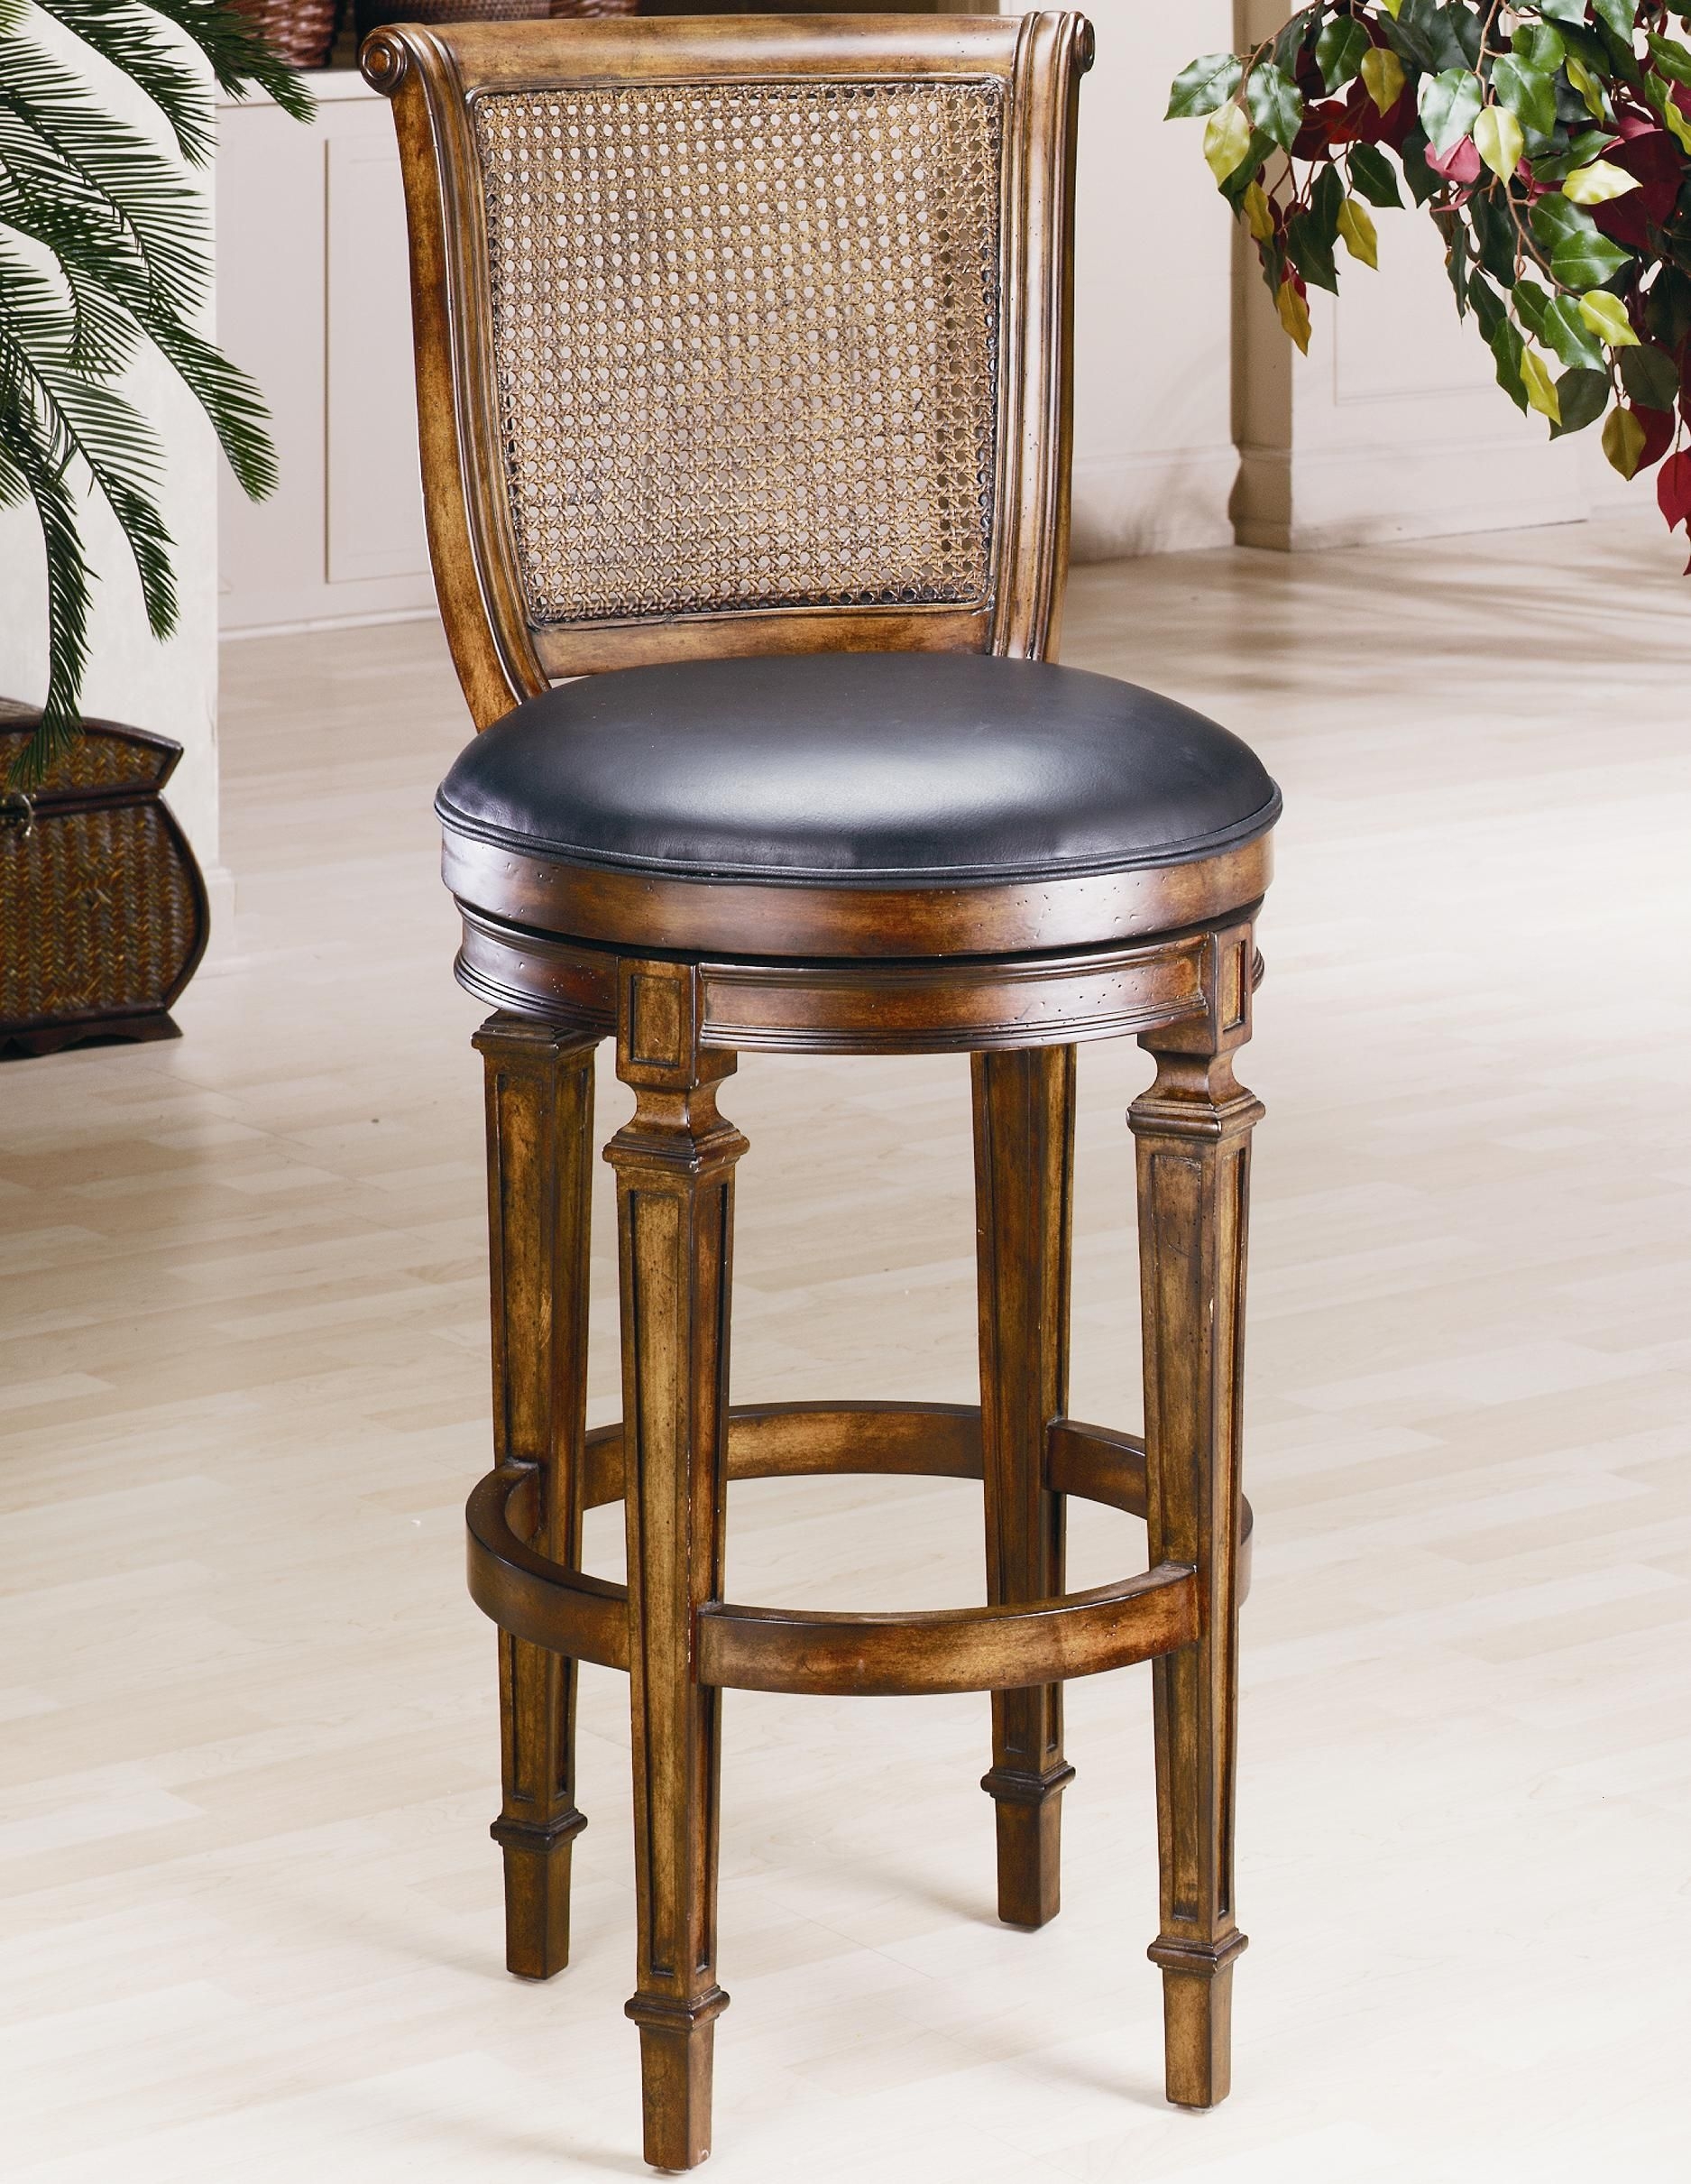 Hillsdale Dalton Cane Back Swivel Counter Stool With Leather Seat 61908